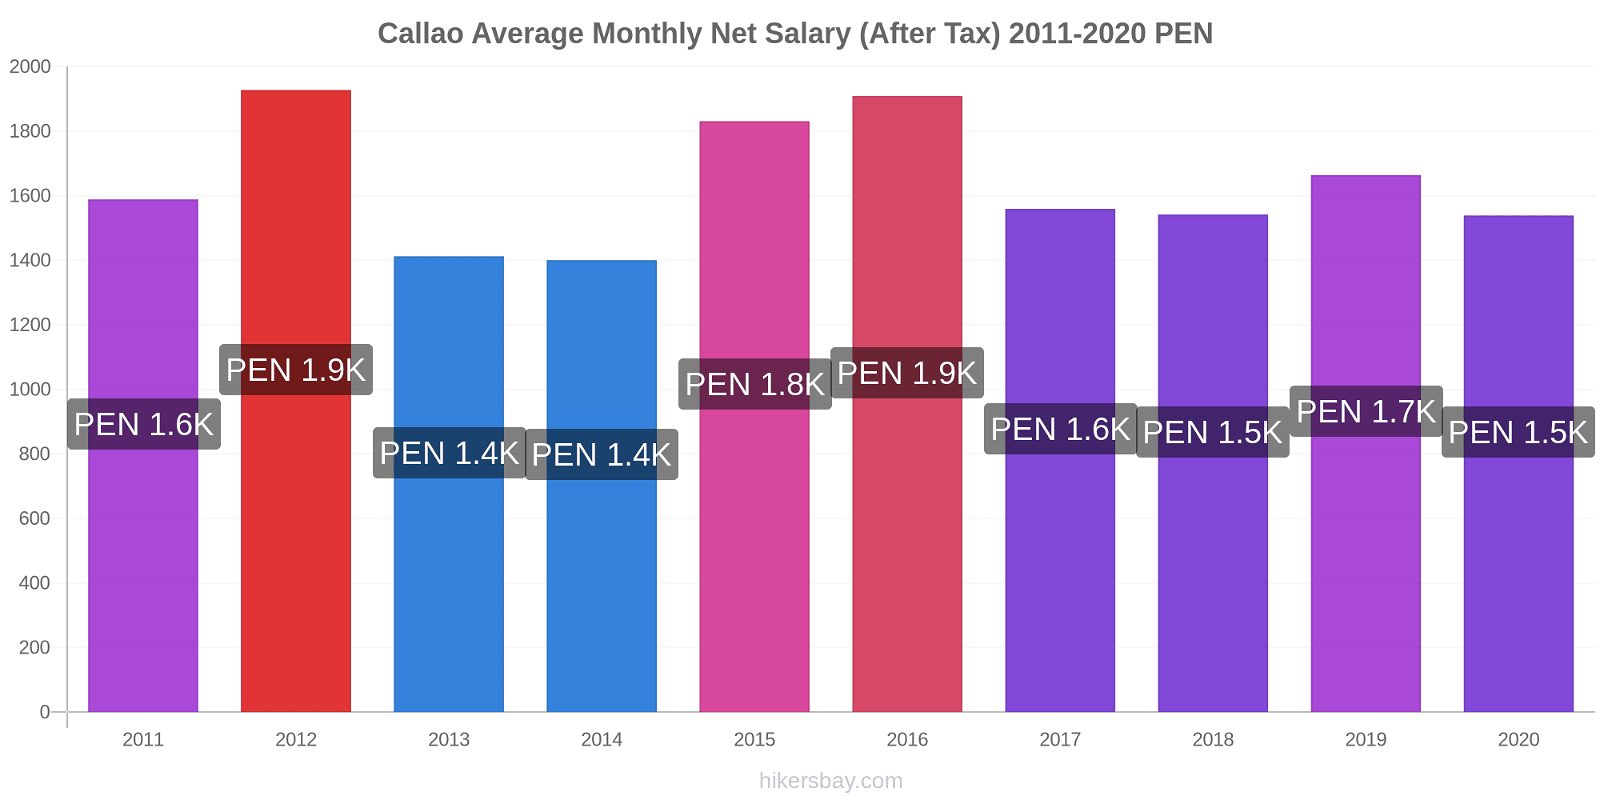 Callao price changes Average Monthly Net Salary (After Tax) hikersbay.com